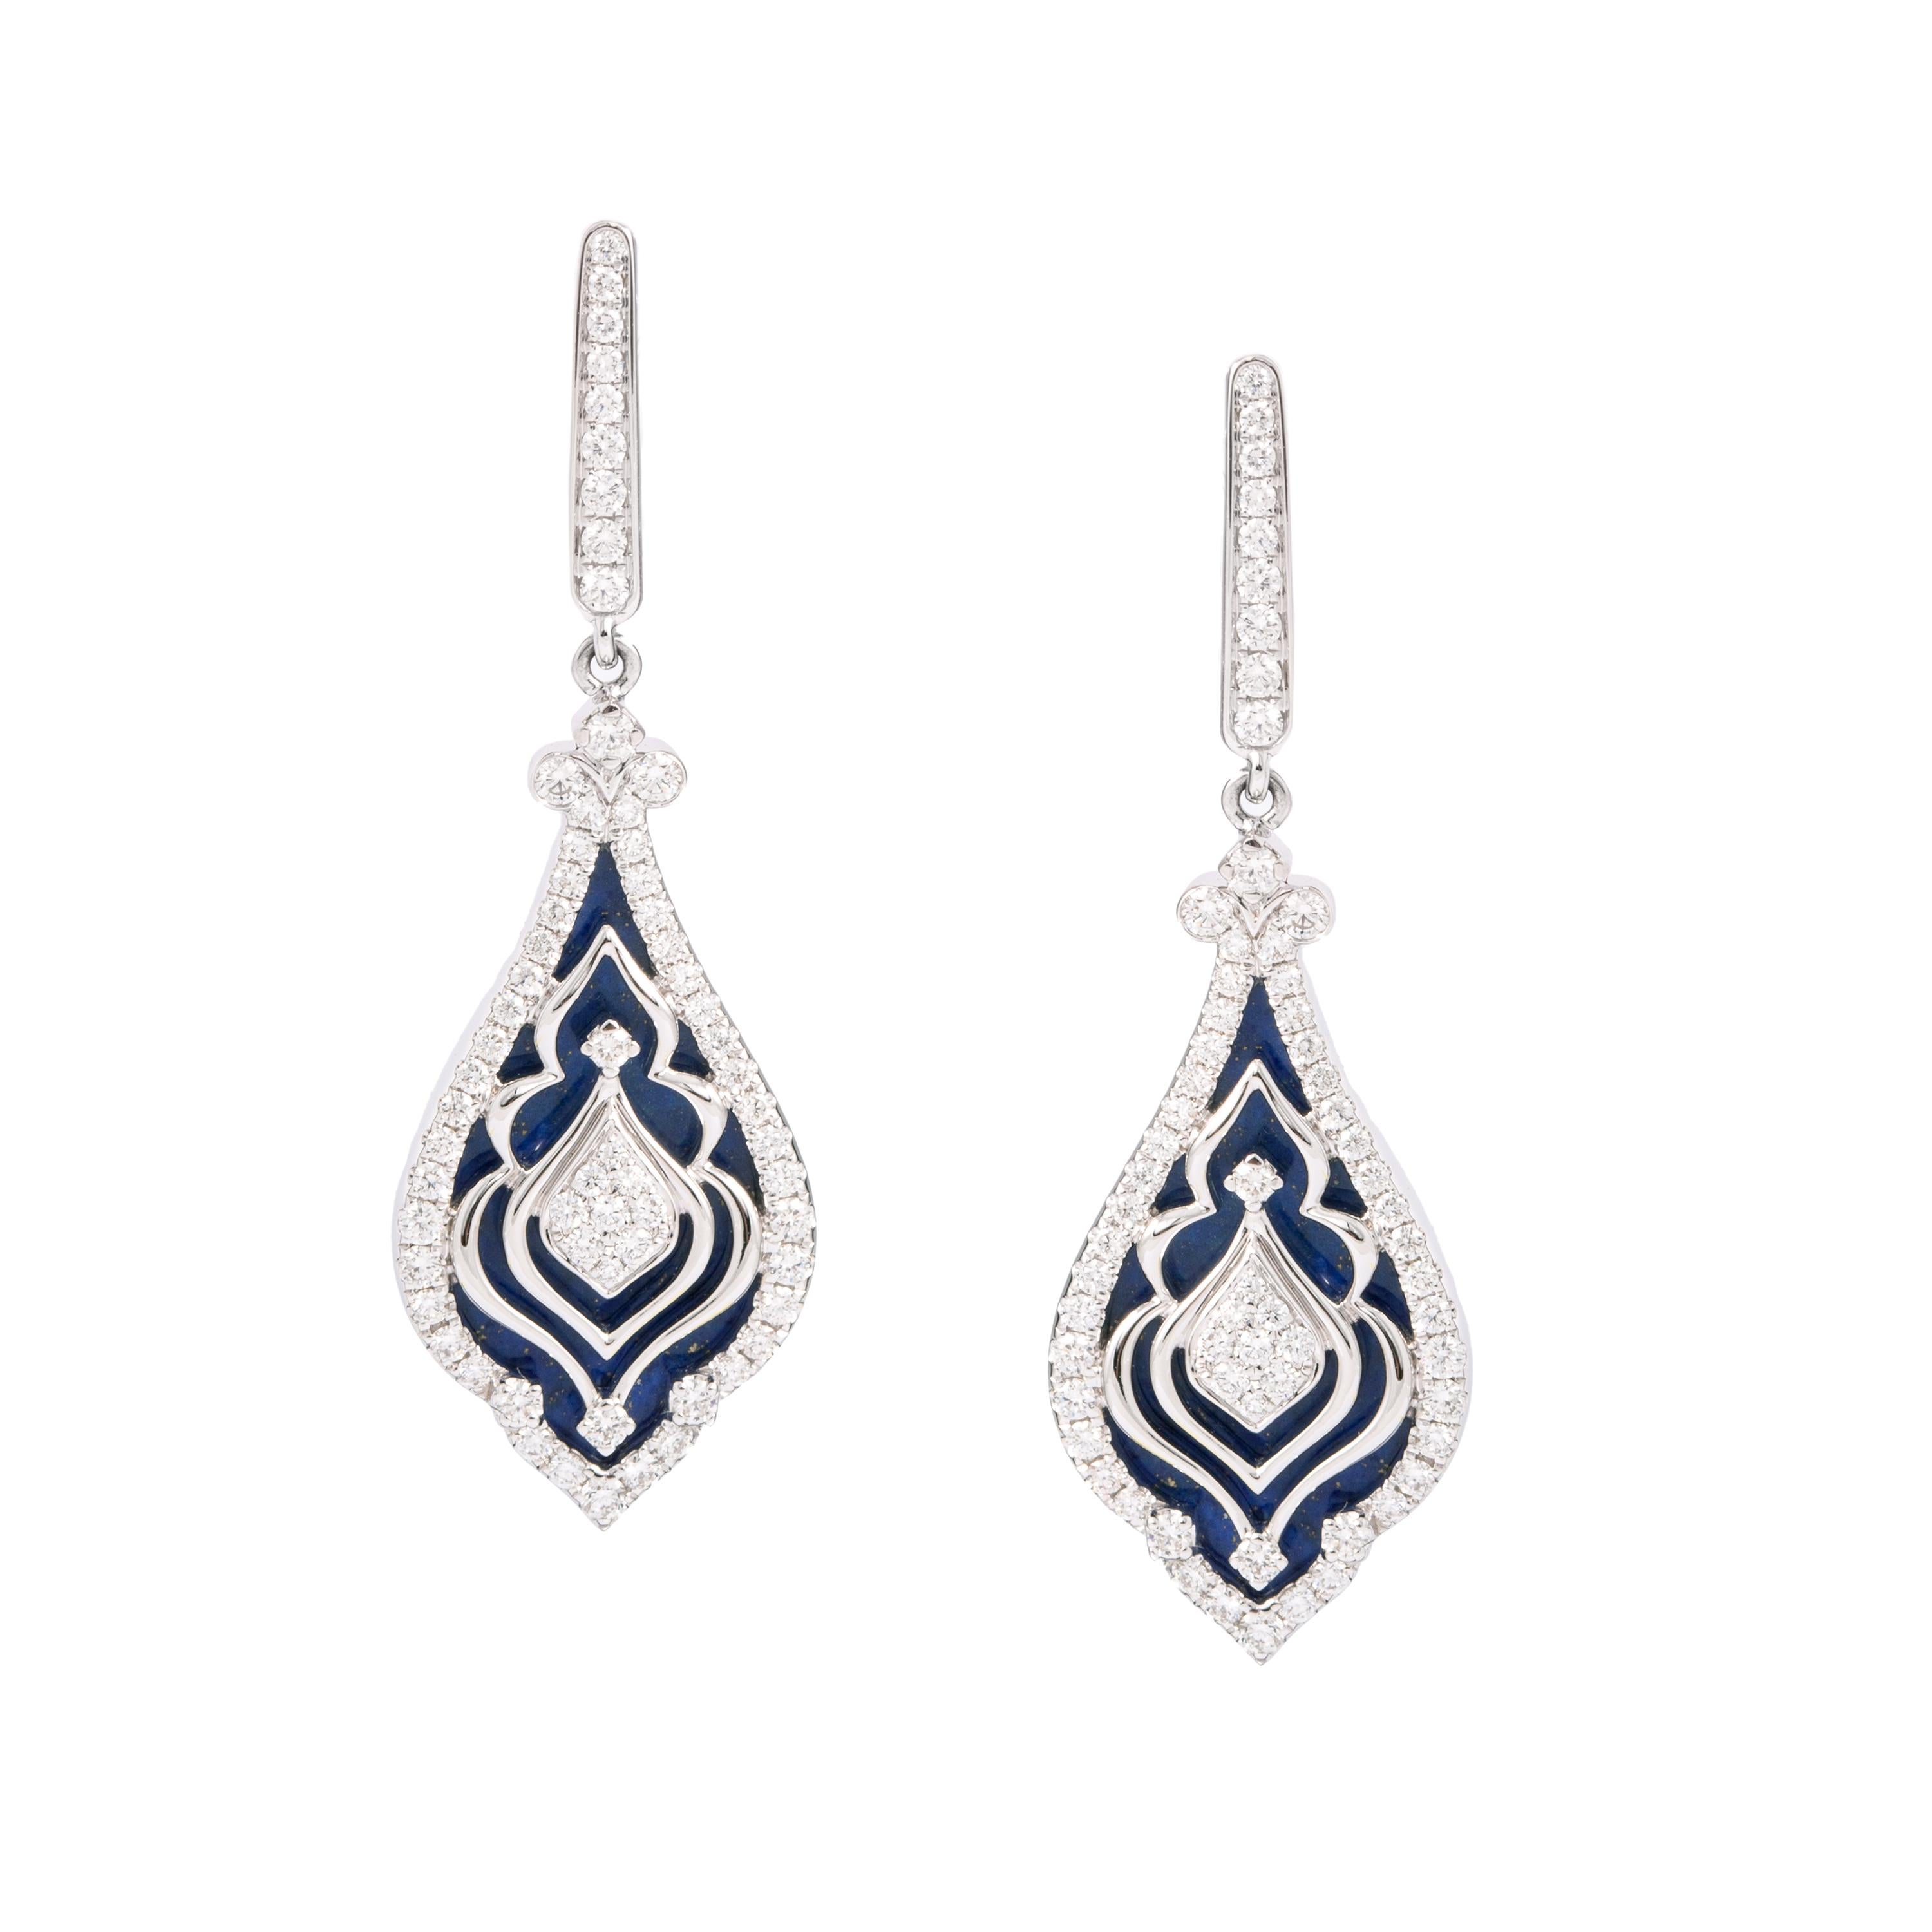 Earrings in 18kt white gold set with 128 diamonds 1.14 cts and 2 lapis lazuli 5.09 cts